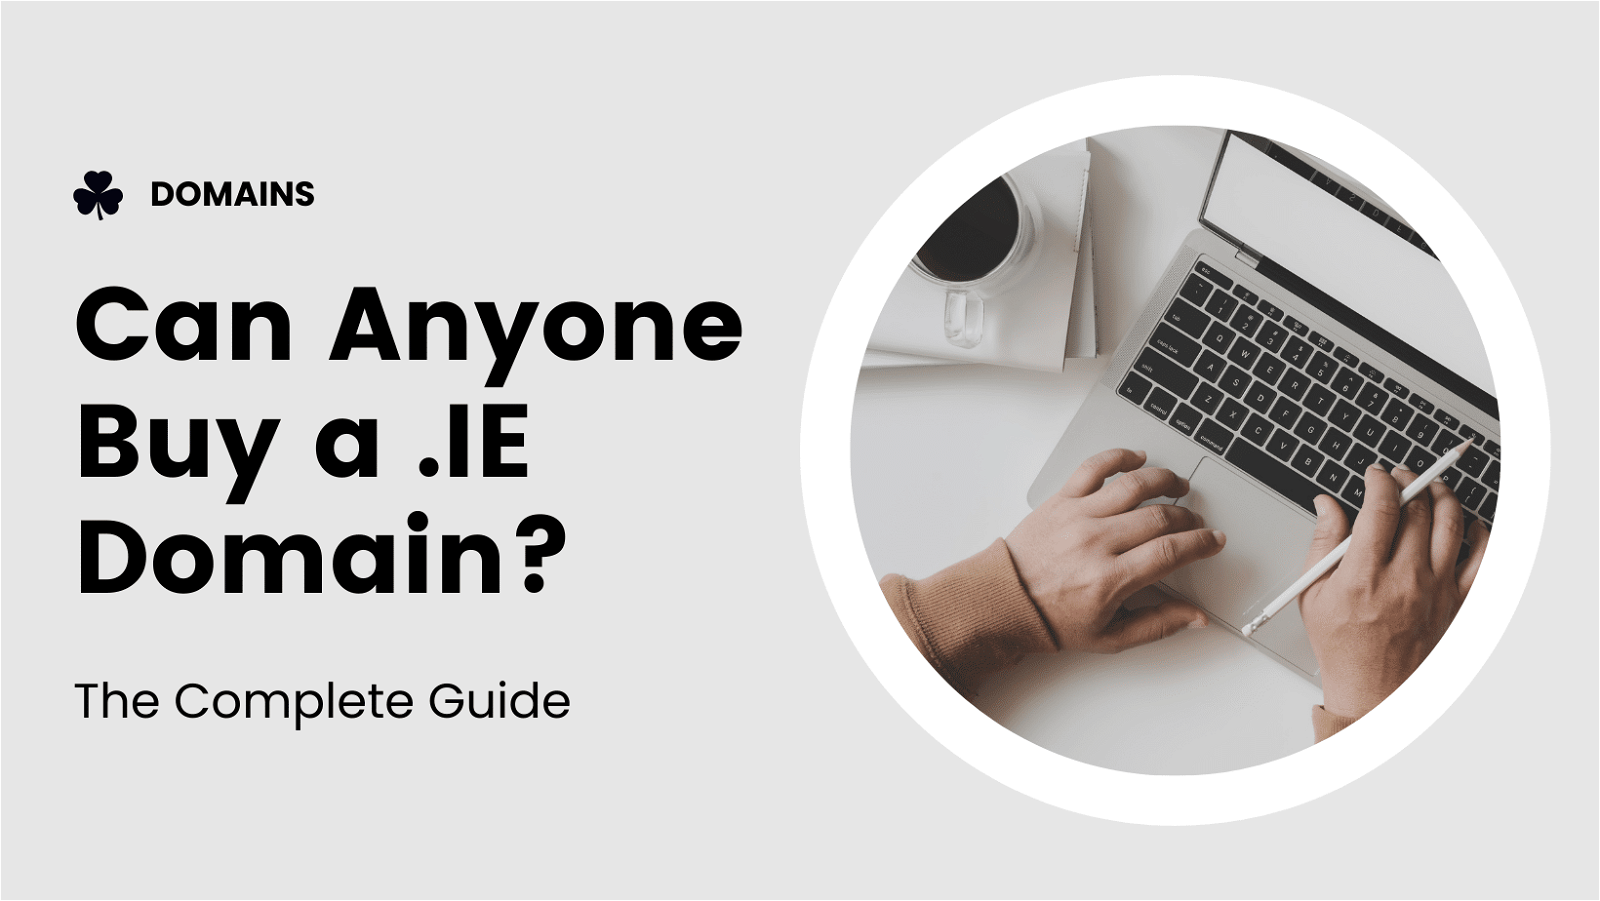 Looking for a complete guide on how to buy a .IE domain? Find out if anyone can purchase a .IE domain in this comprehensive guide.